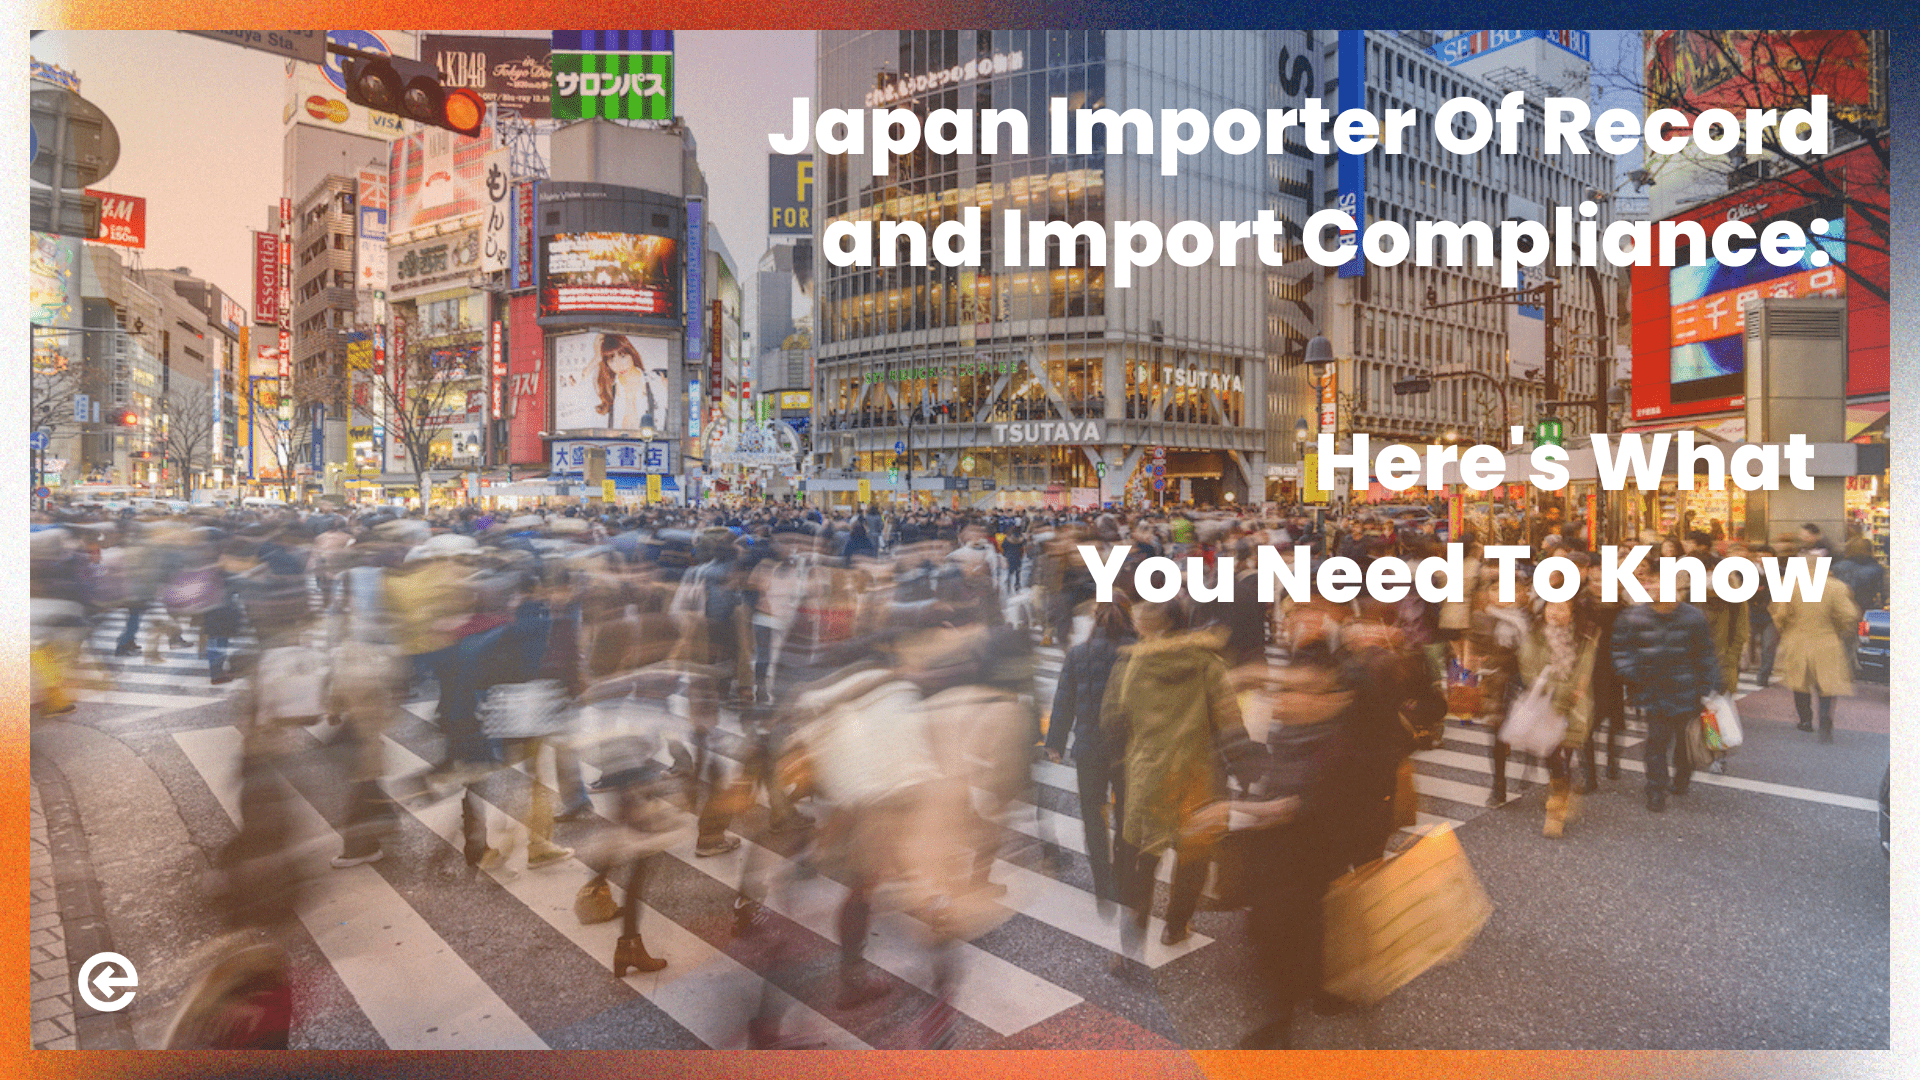 Japan Importer of Record and Import Compliance: Here’s What You Need To Know